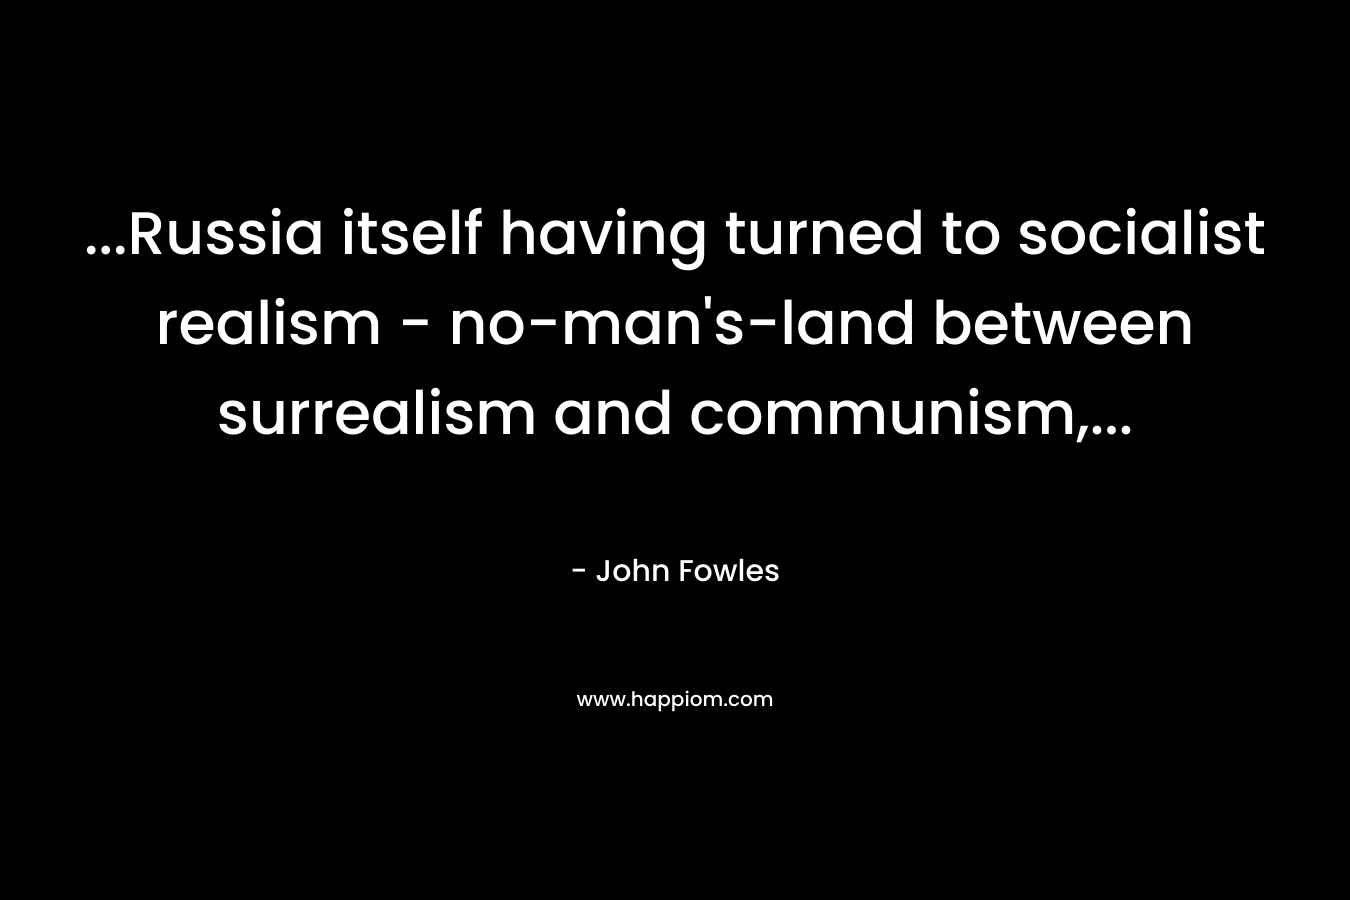 ...Russia itself having turned to socialist realism - no-man's-land between surrealism and communism,...